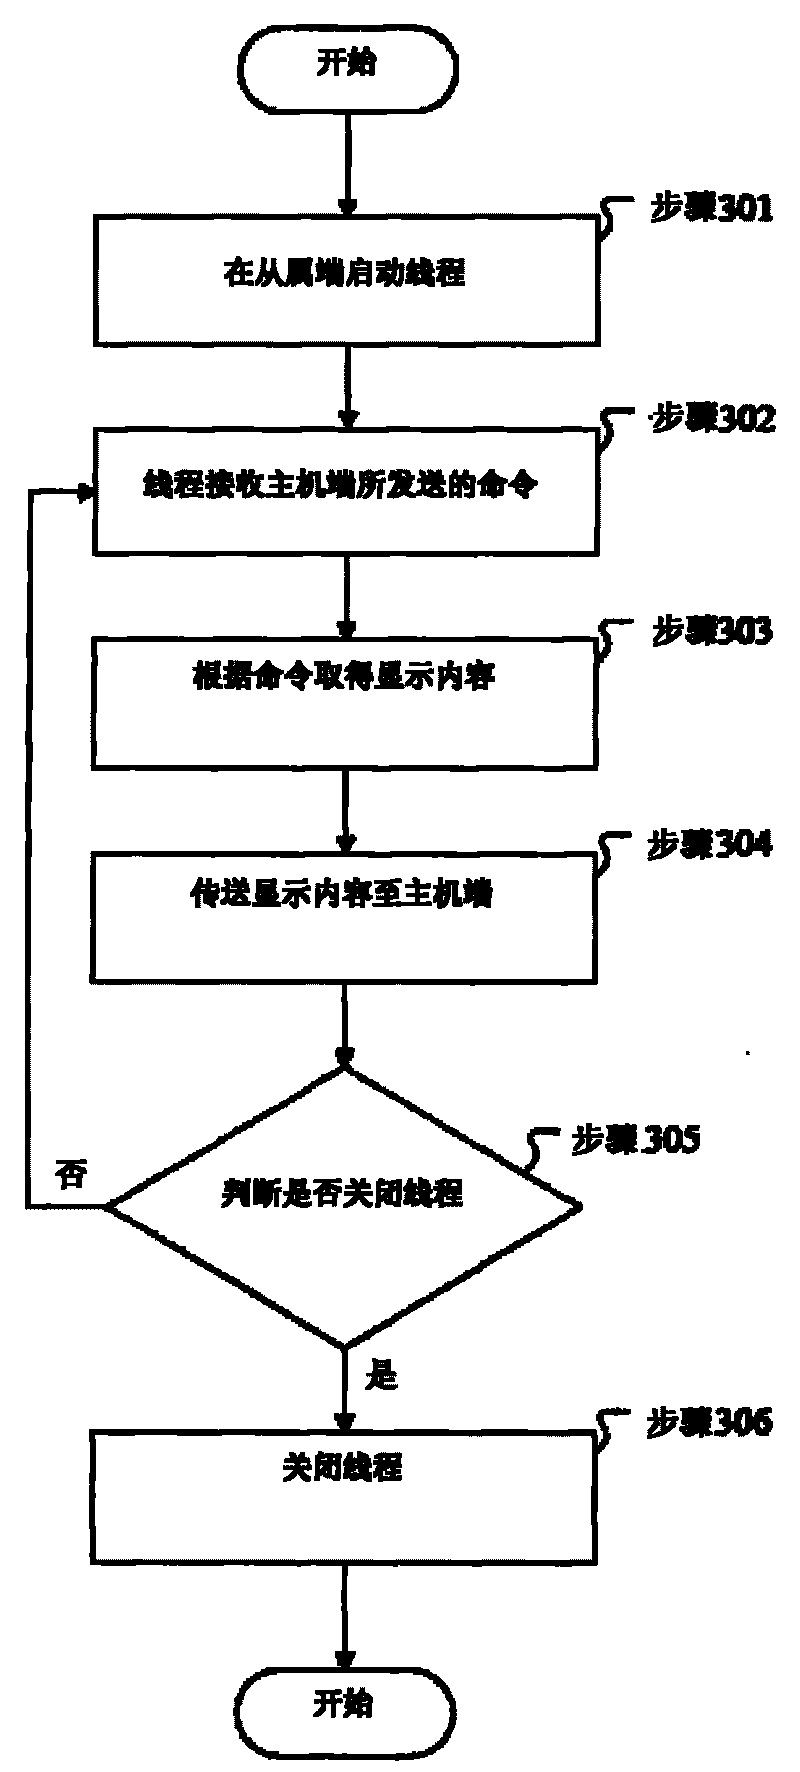 Synchronous picture display device and method thereof